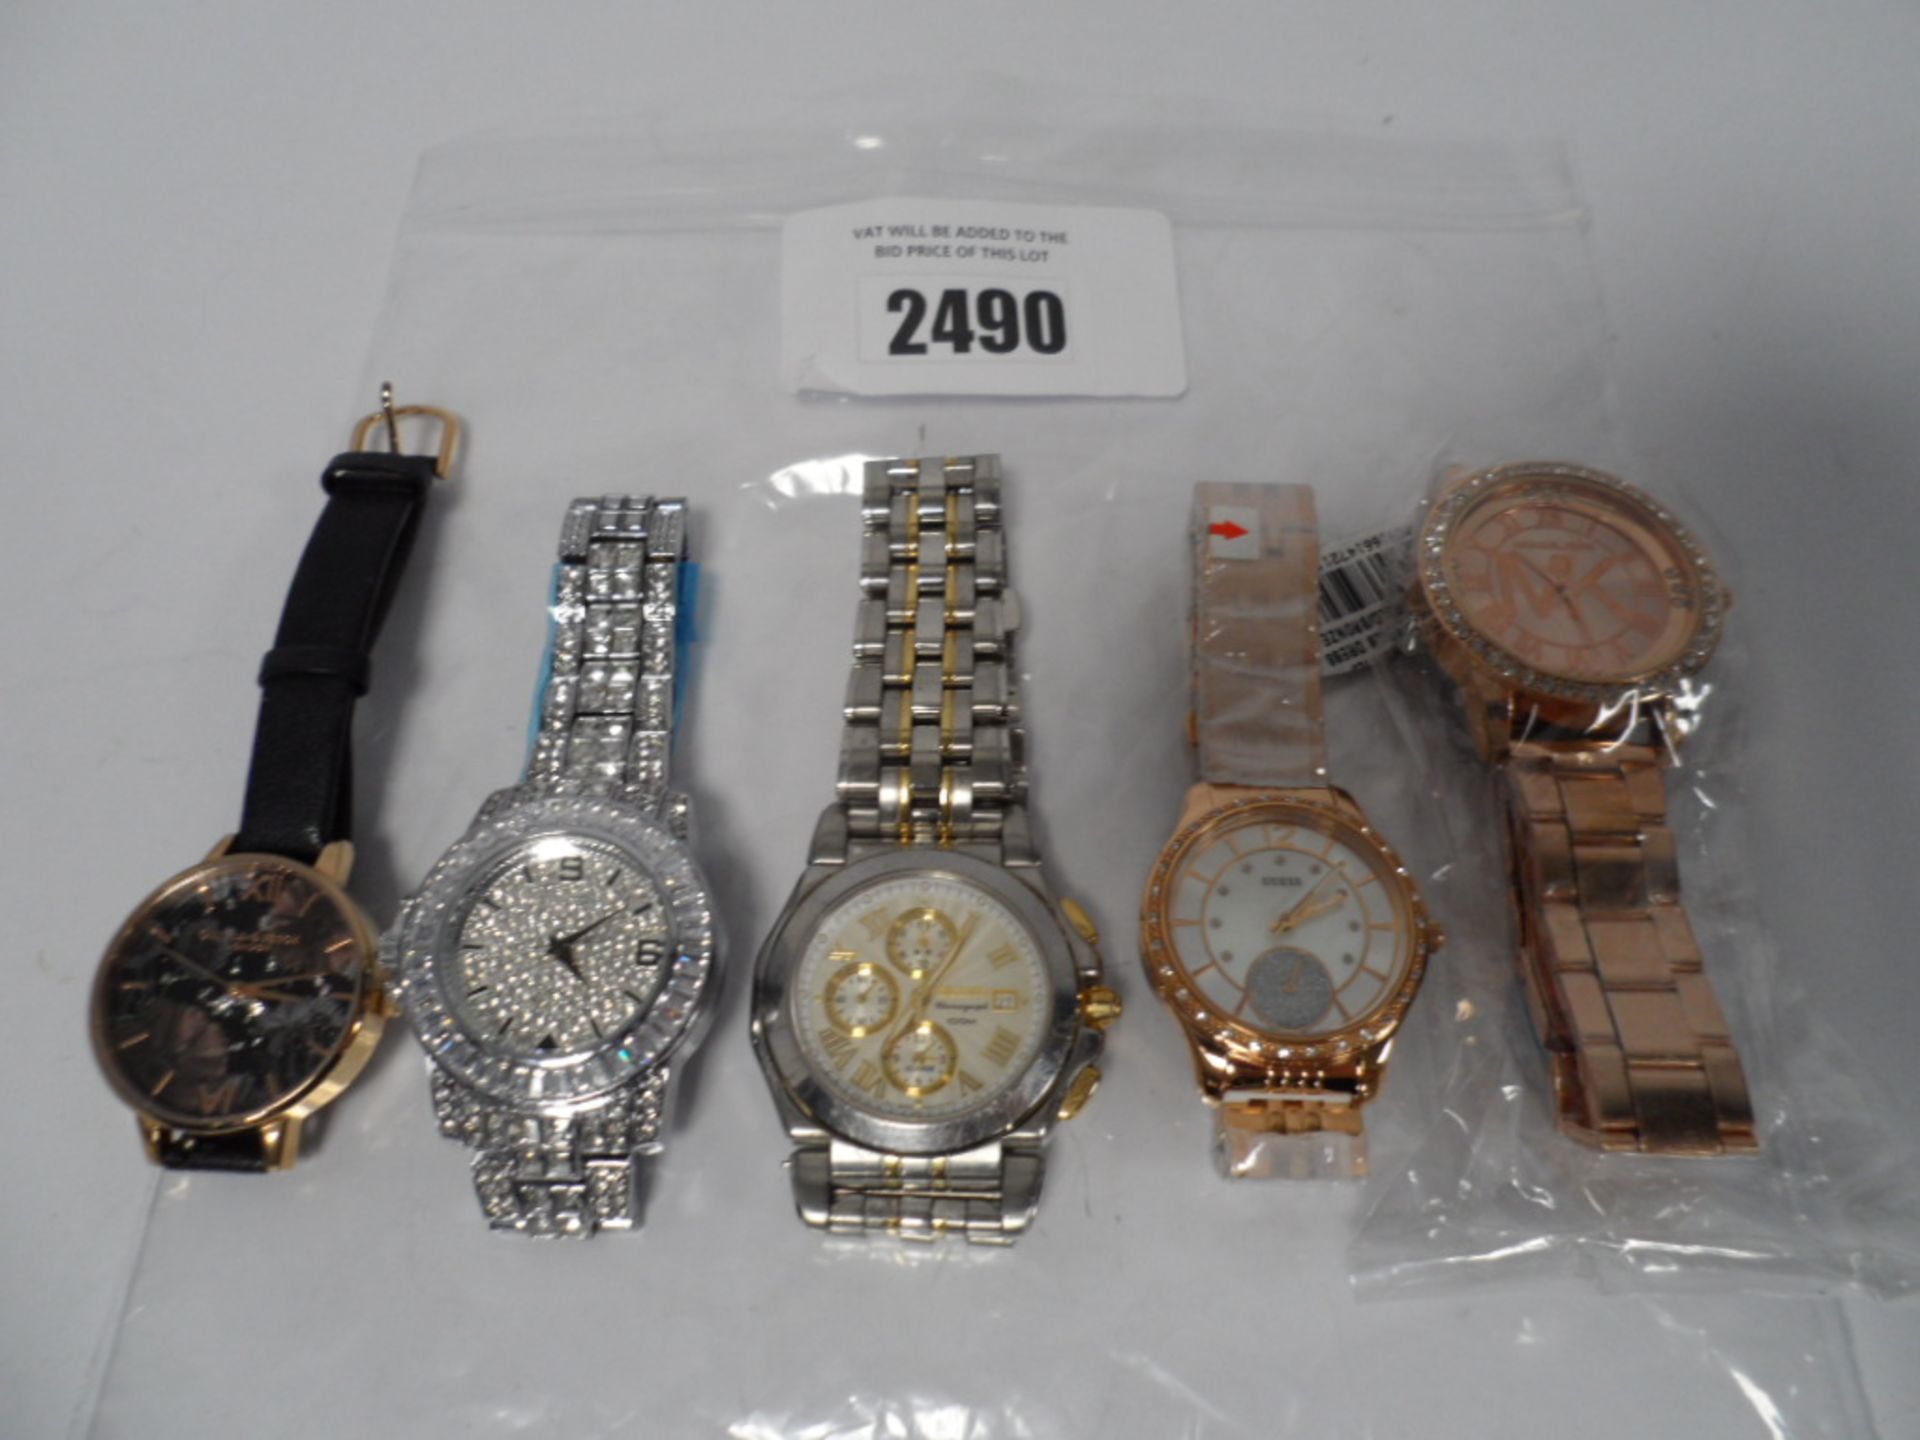 Bag of five loose watches including Sekio, Michael Kors, Guess, etc.